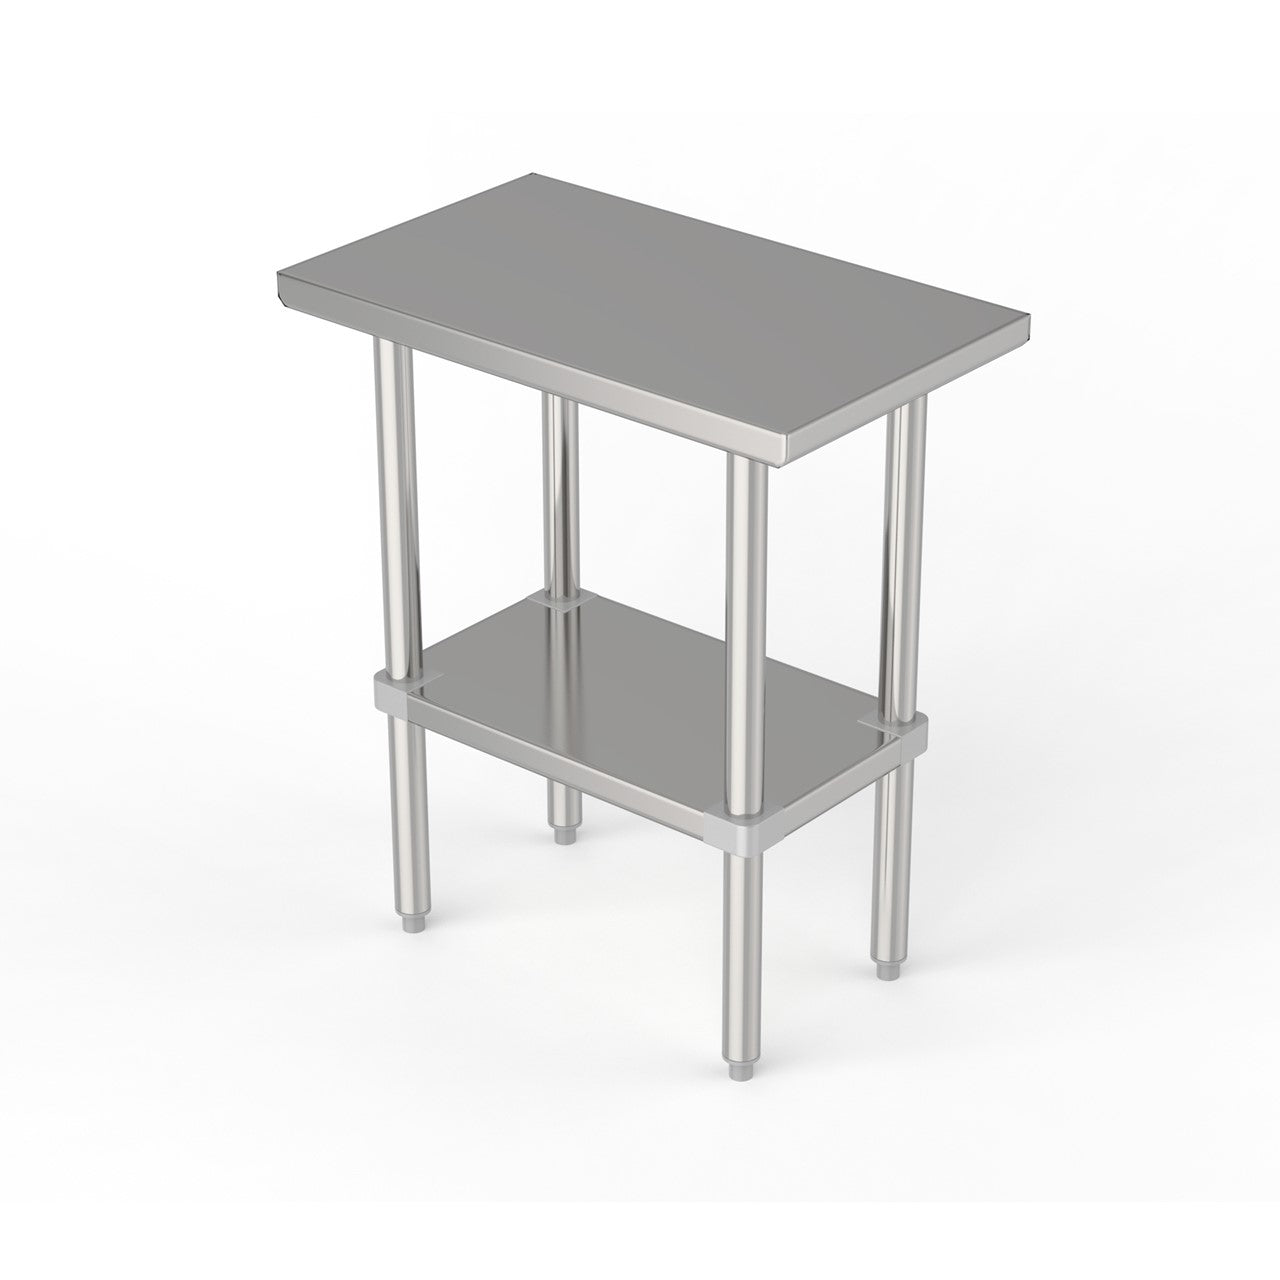 GSW Commercial Grade Flat Top Work Table with All Stainless Steel Top, Undershelf & Legs, Adjustable Bullet Feet, NSF/ETL Approved to Meet Sanitation Food Service Standard 37 (24"D x 18"L x 35"H)